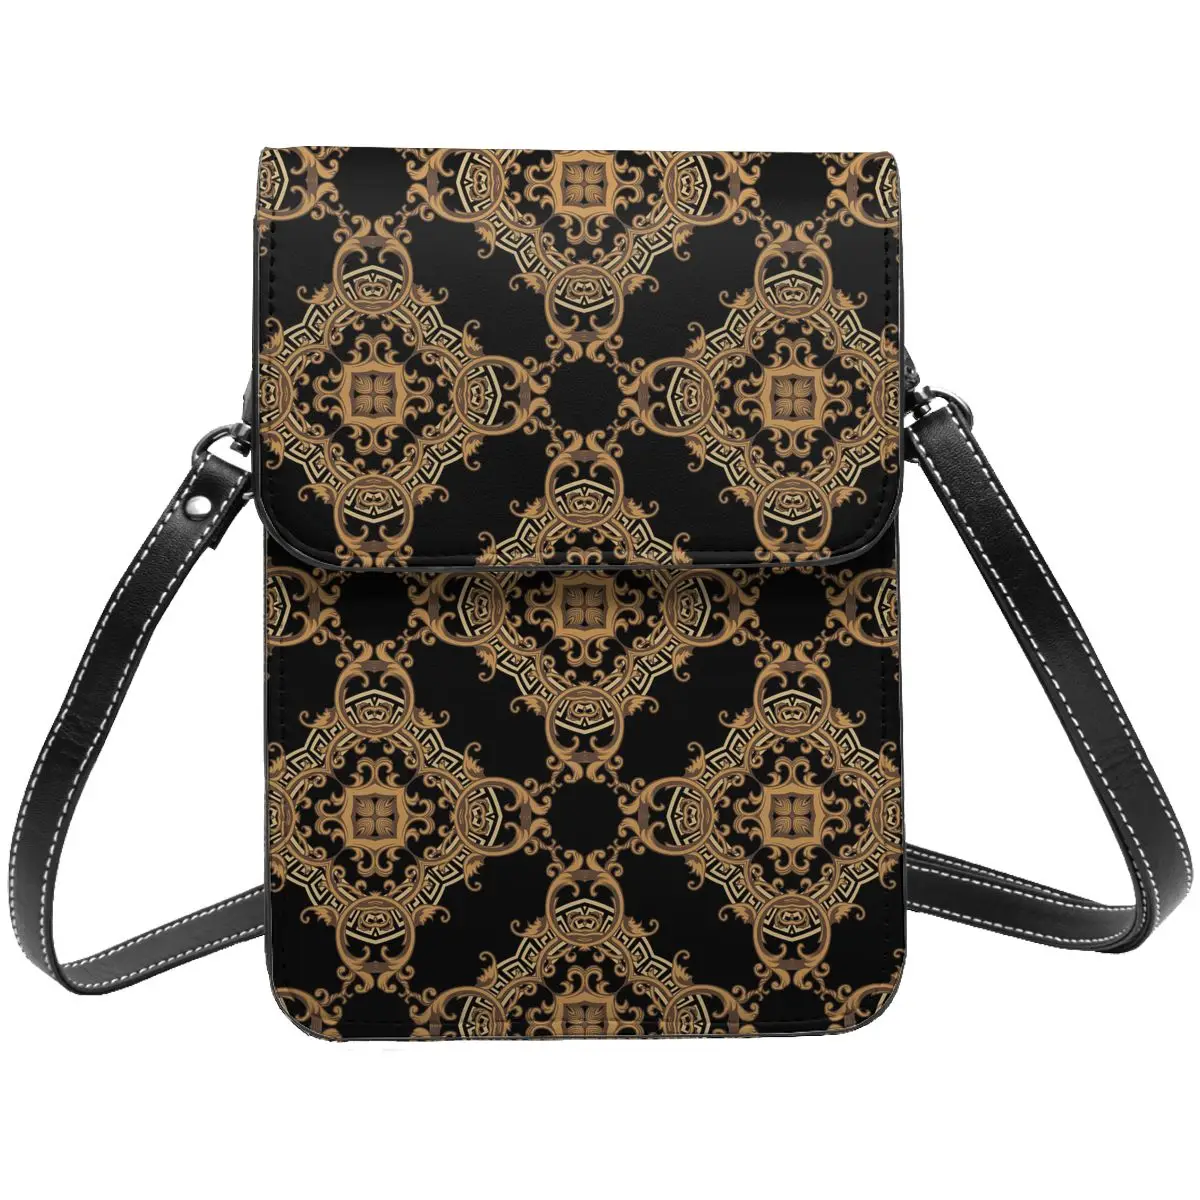 Baroque Floral Greek Key Cell Phone Purse Leather Card Case Stylish Woman Golden Flowers Meanders Luxury Mini Shoulder Bag